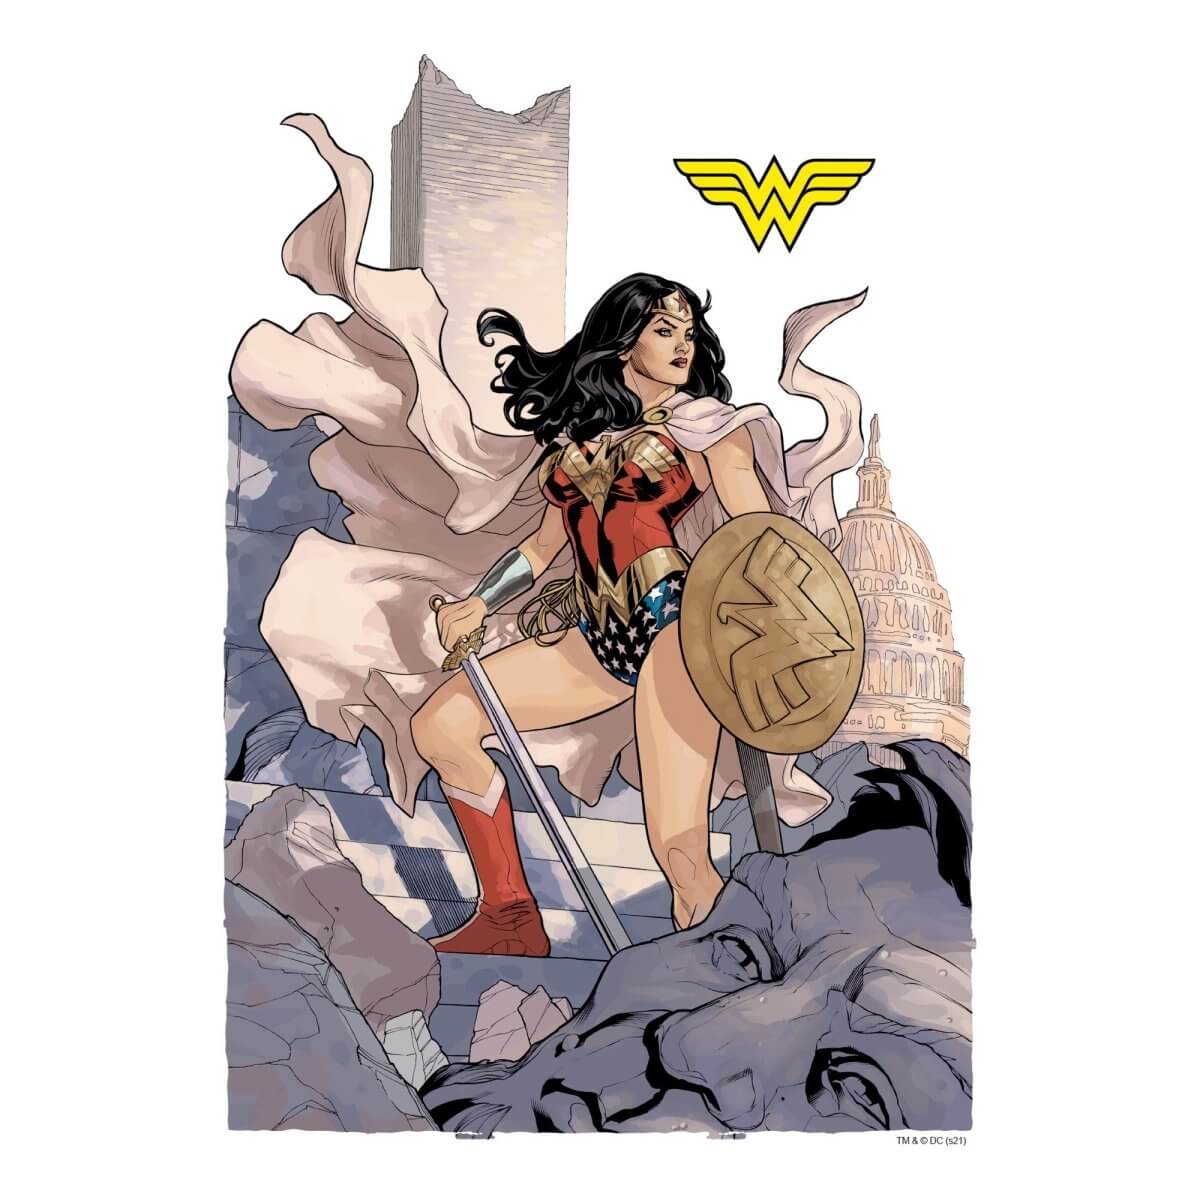 Kismet Decals Wonder Woman #13 Comic Cover Series Officially Licensed Wall Sticker - Easy DIY DC Comics Home, Kids or Adult Bedroom, Office, Living Room Decor Wall Art - Kismet Decals